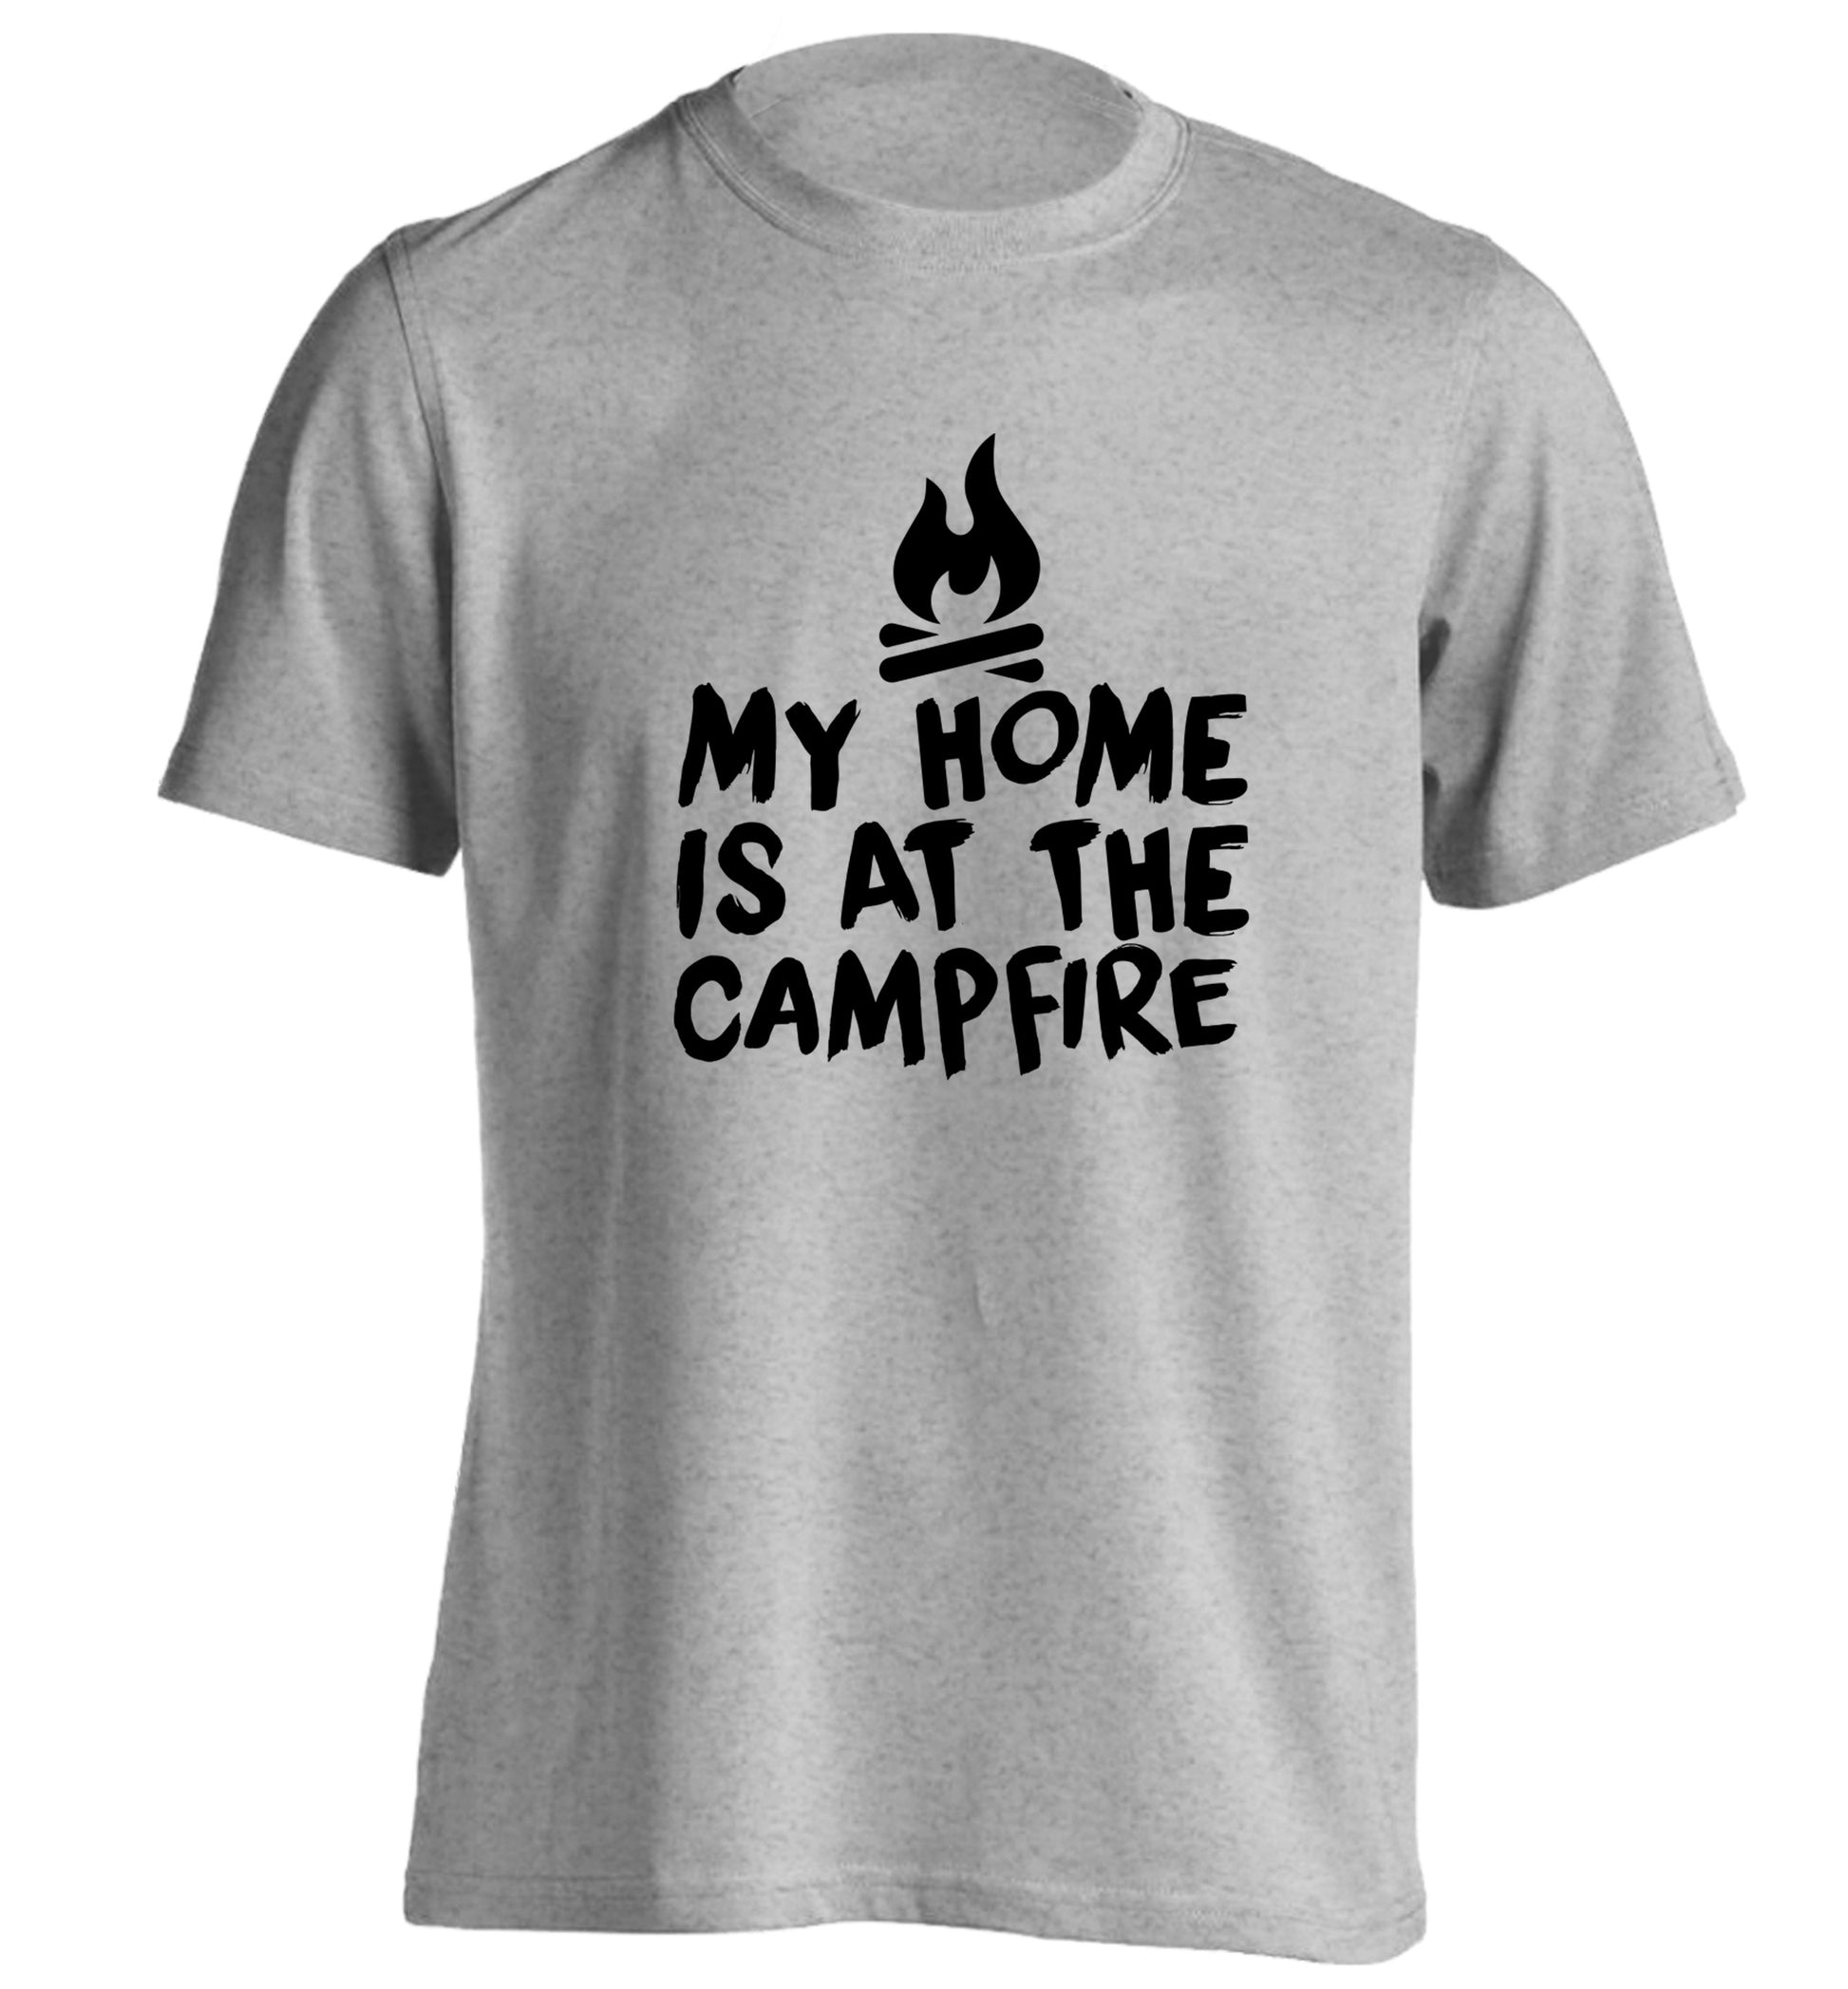 My home is at the campfire adults unisex grey Tshirt 2XL